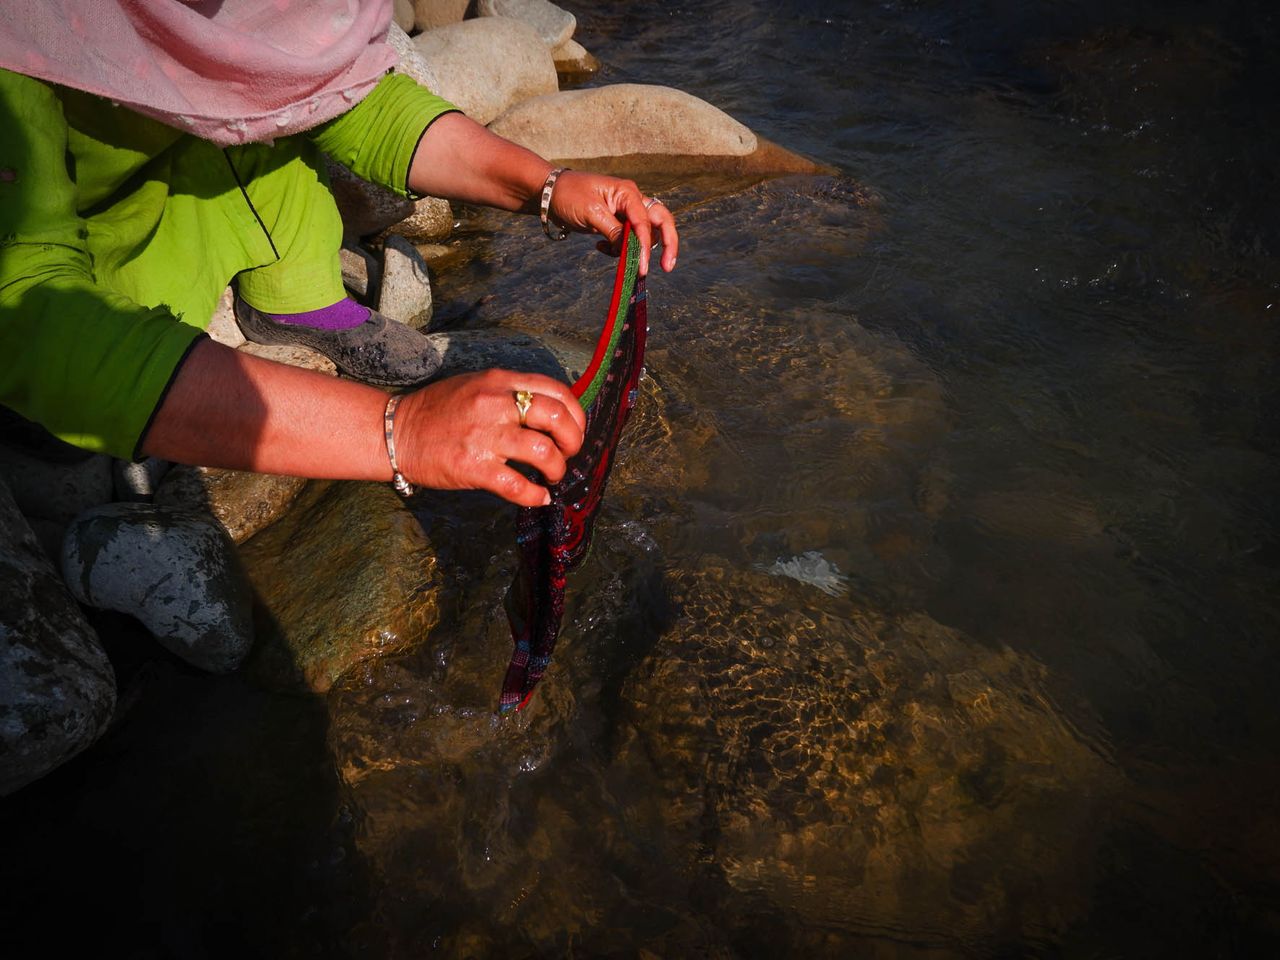 Razia washes her menstrual cloth in a stream near her tent in Chandipora area on the outskirts of Srinagar. Date: 27 April, 2022.